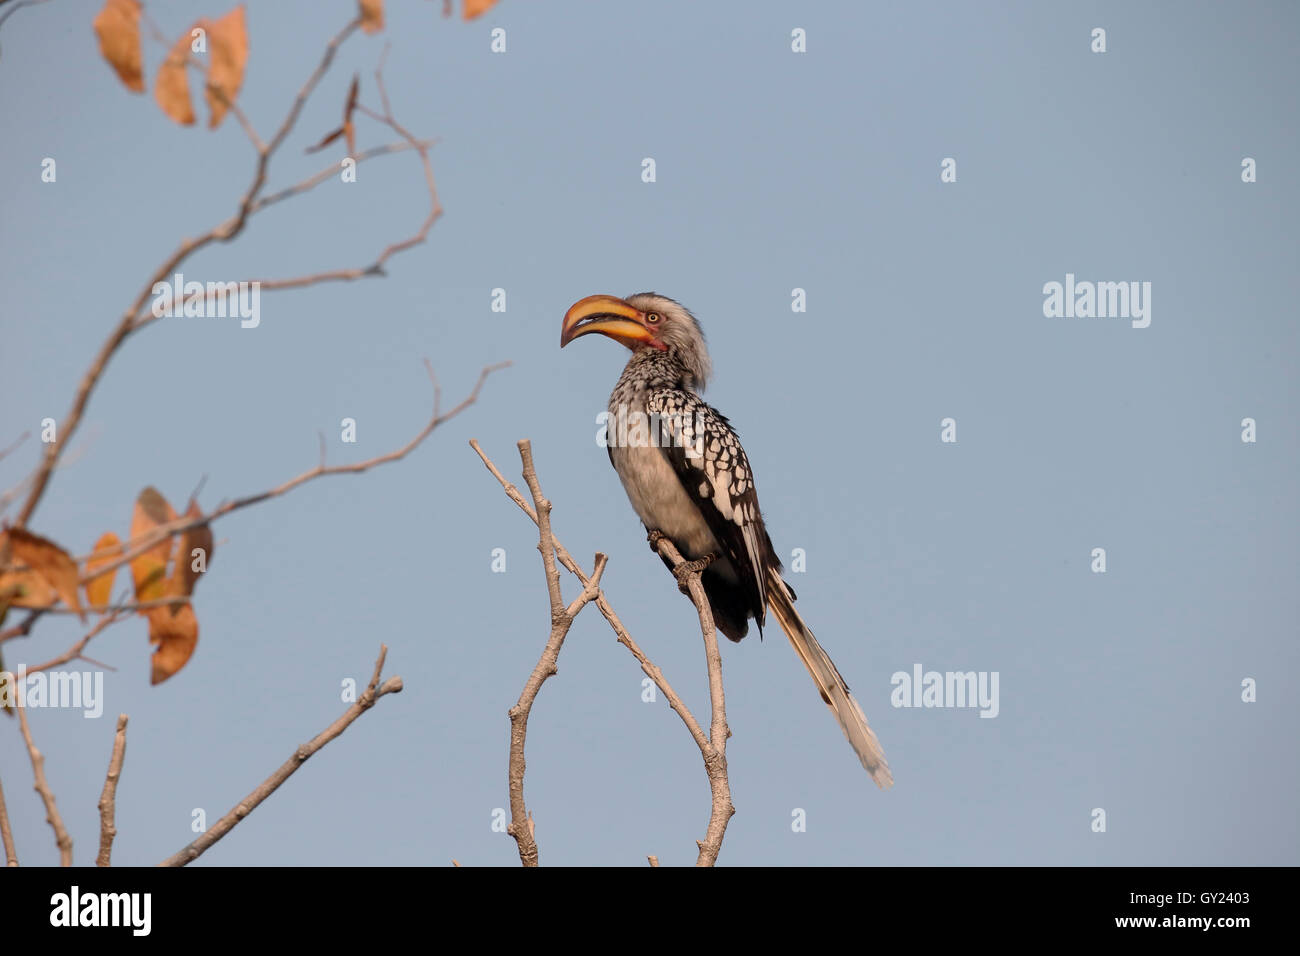 Southern yellow-billed hornbill, Tockus leucomelas, single bird on branch, South Africa, August 2016 Stock Photo